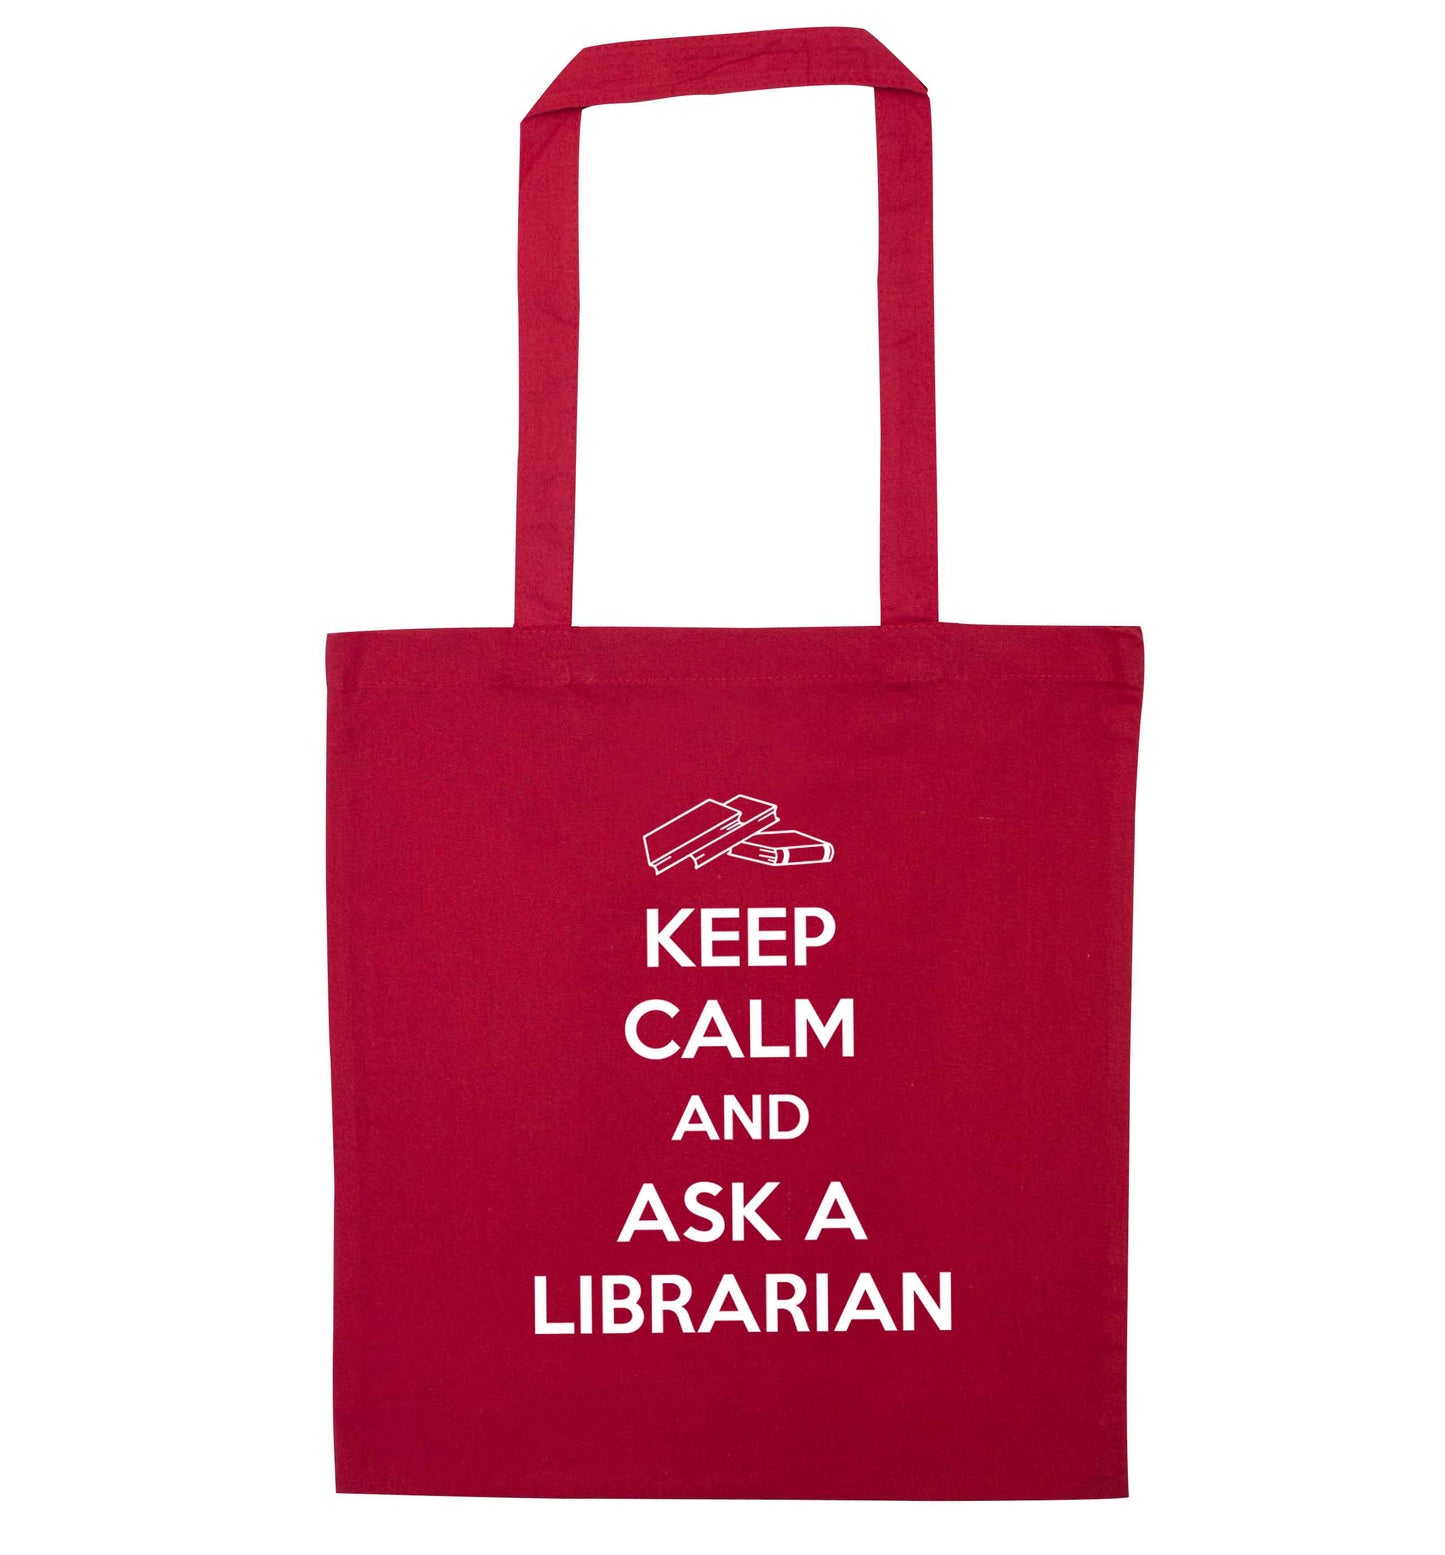 Keep calm and ask a librarian red tote bag